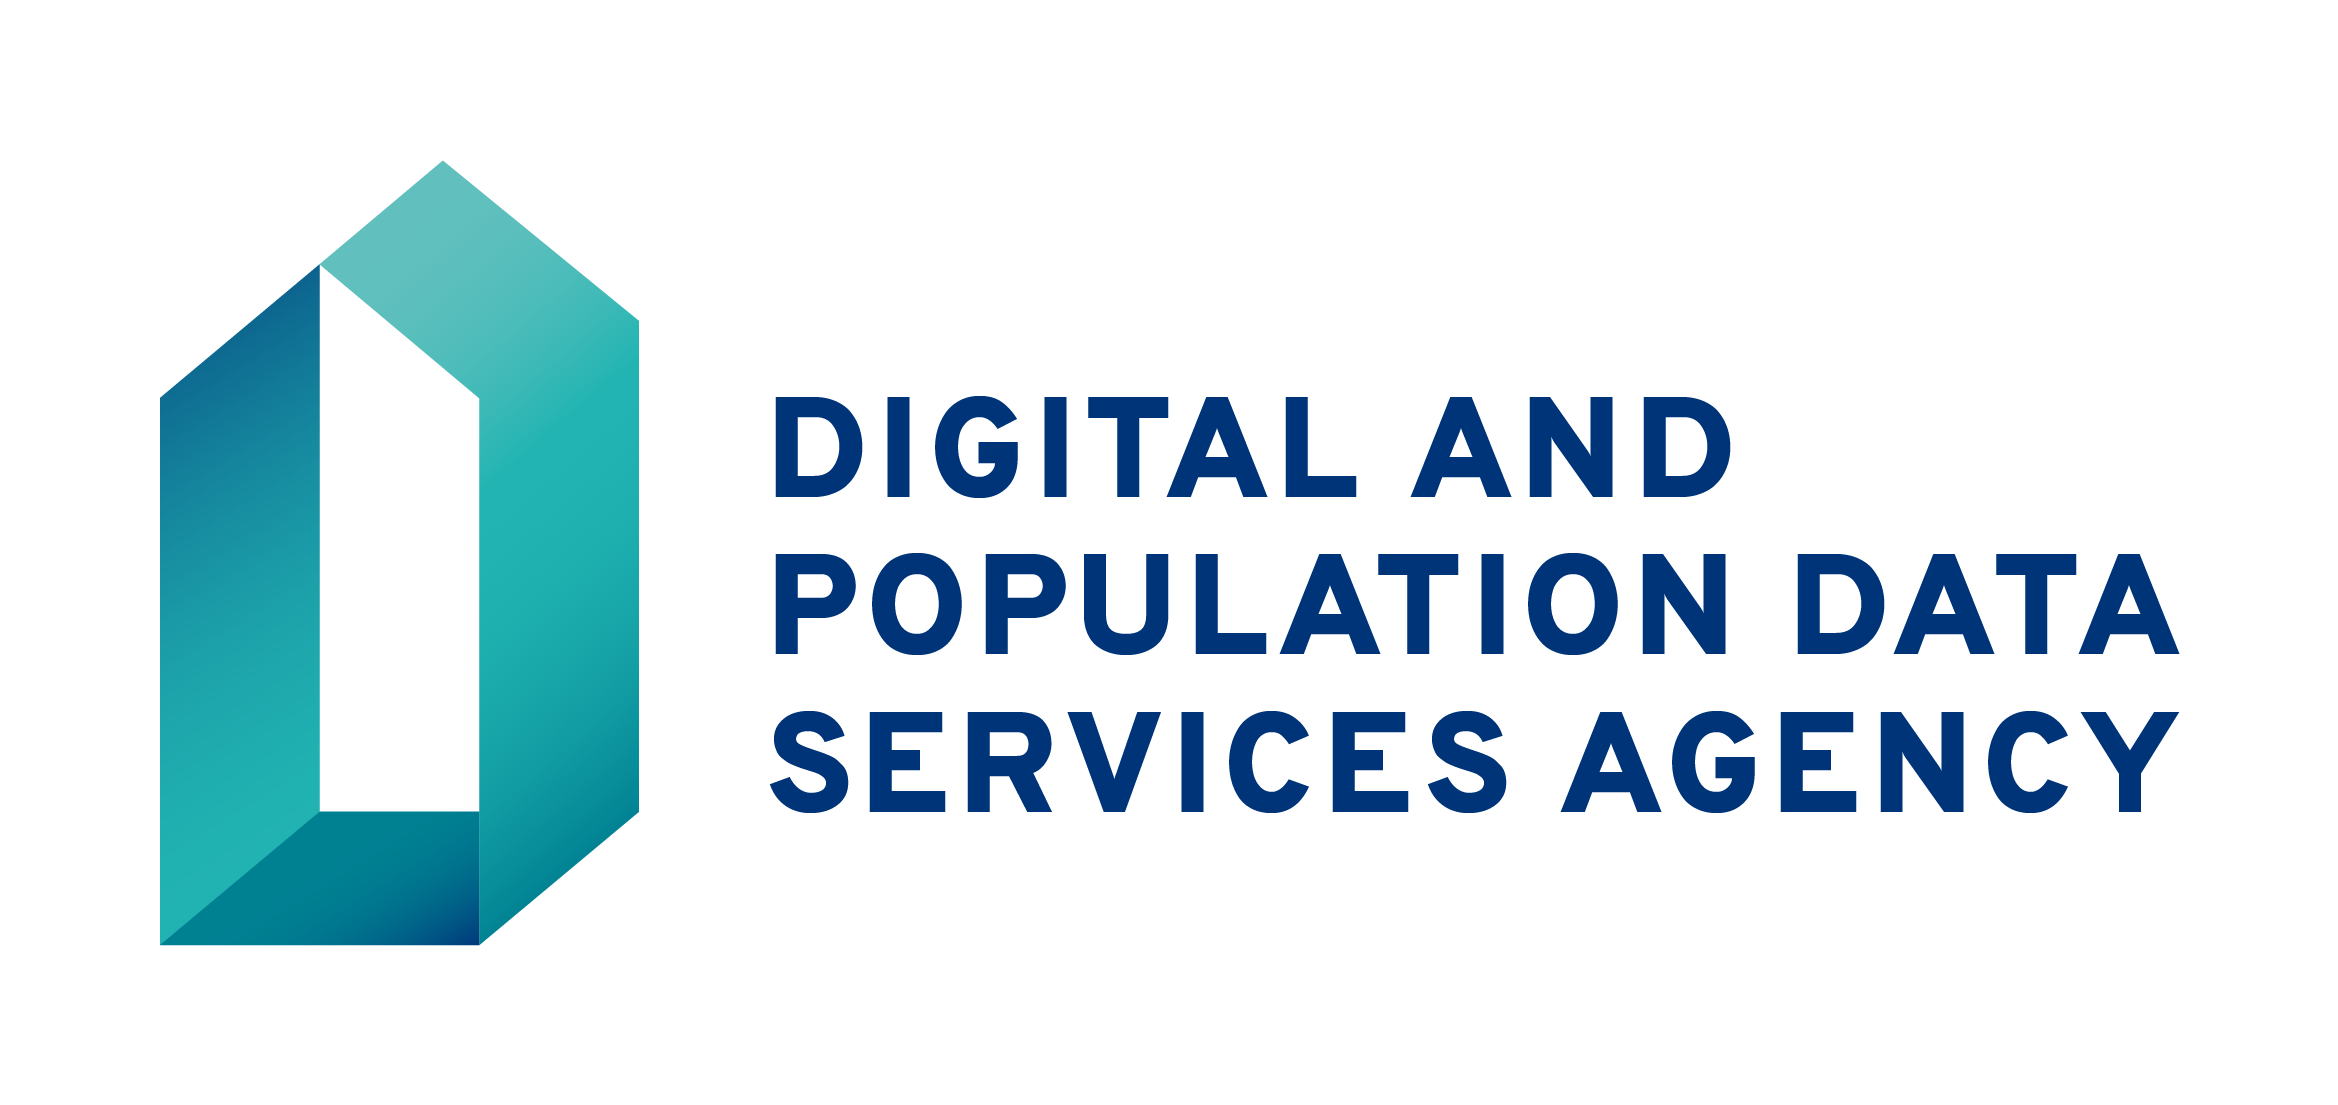 Digital and Population Data Services Agency’s logo in English, normal format